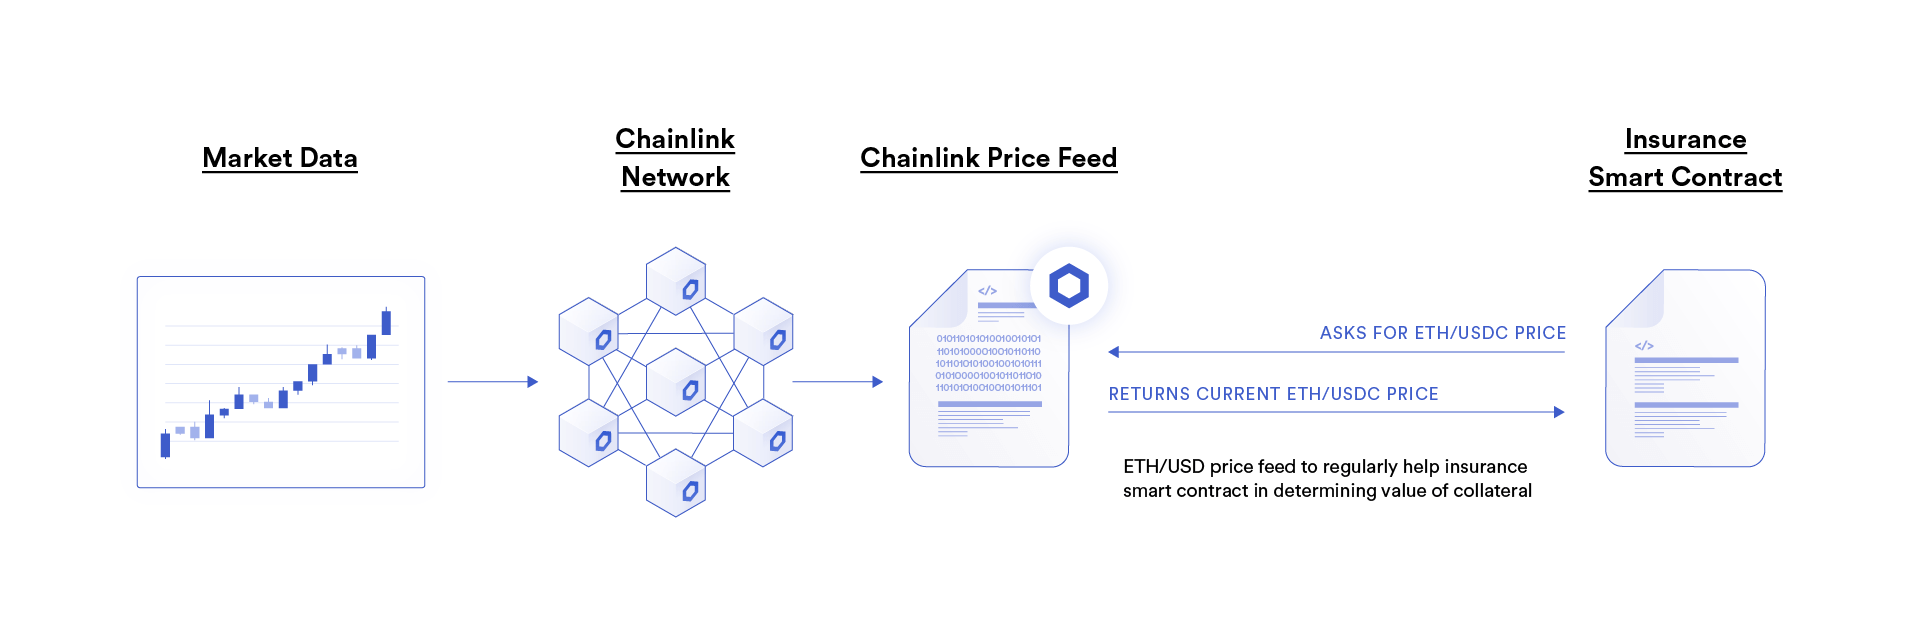 Graphic depicting the workflow using market date from Chainlink nodes and price feeds to determine the value and payouts for policyholders.